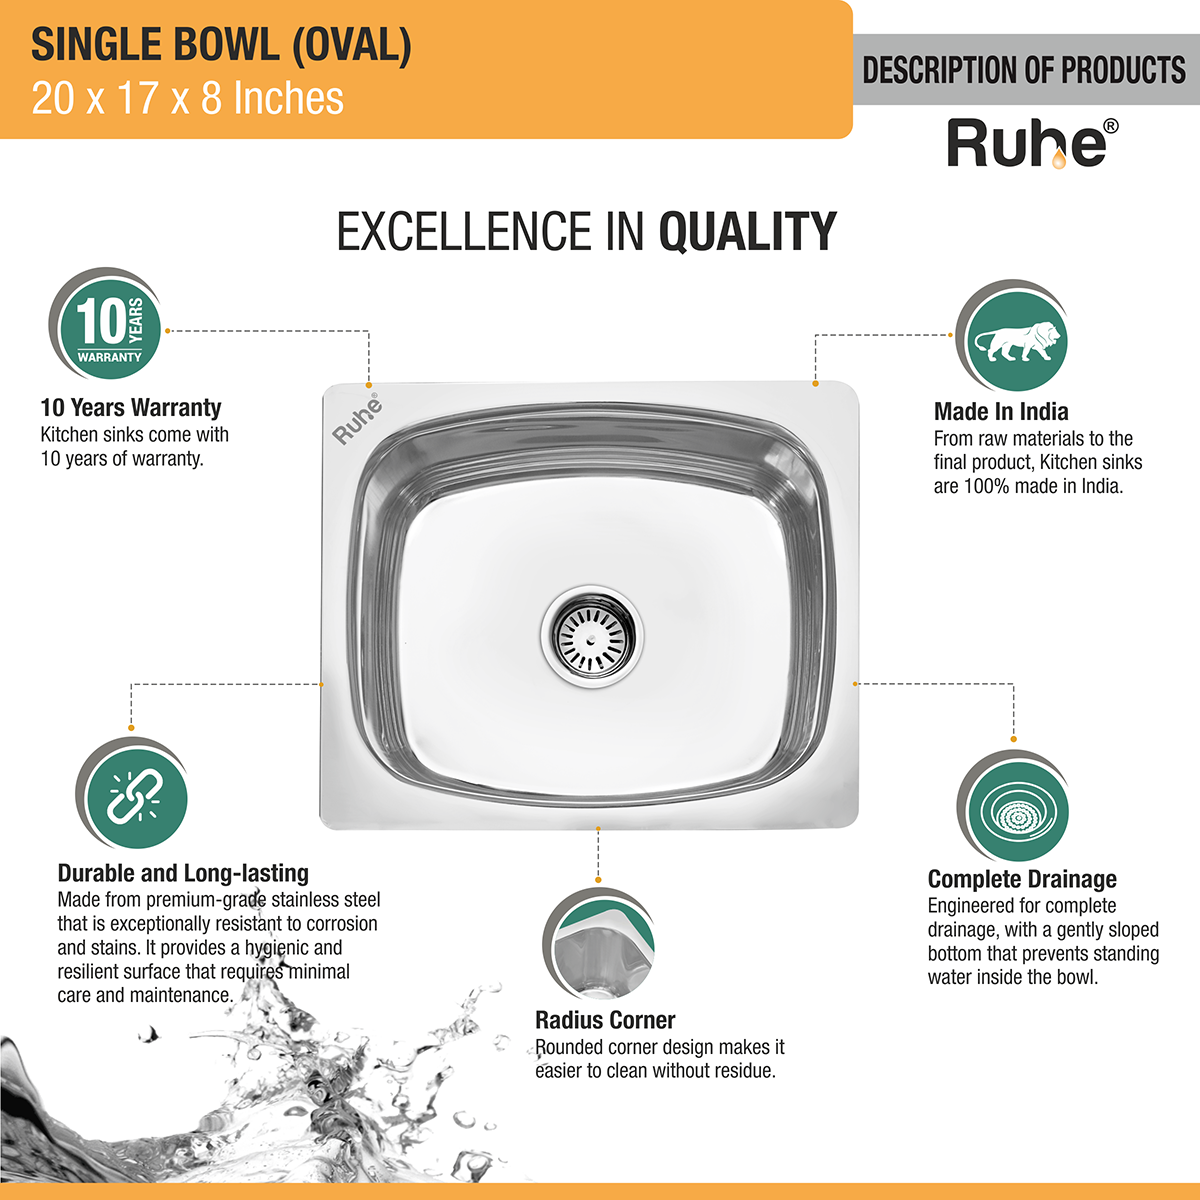 Oval Single Bowl (20 x 17 x 8 inches) Kitchen Sink description of products